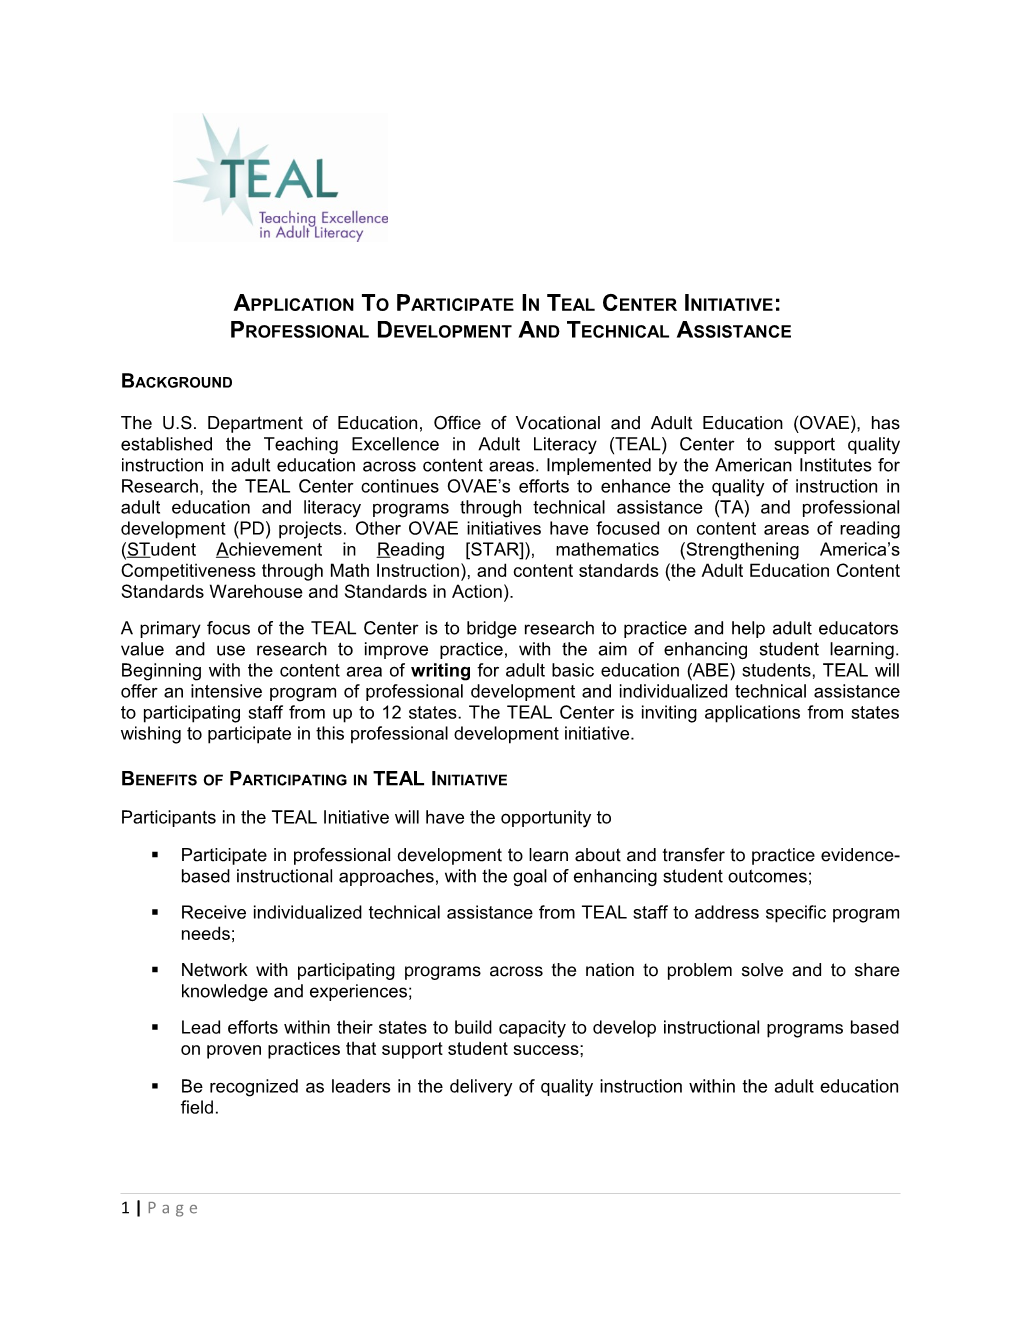 Application to Participate in Teal Center Initiative